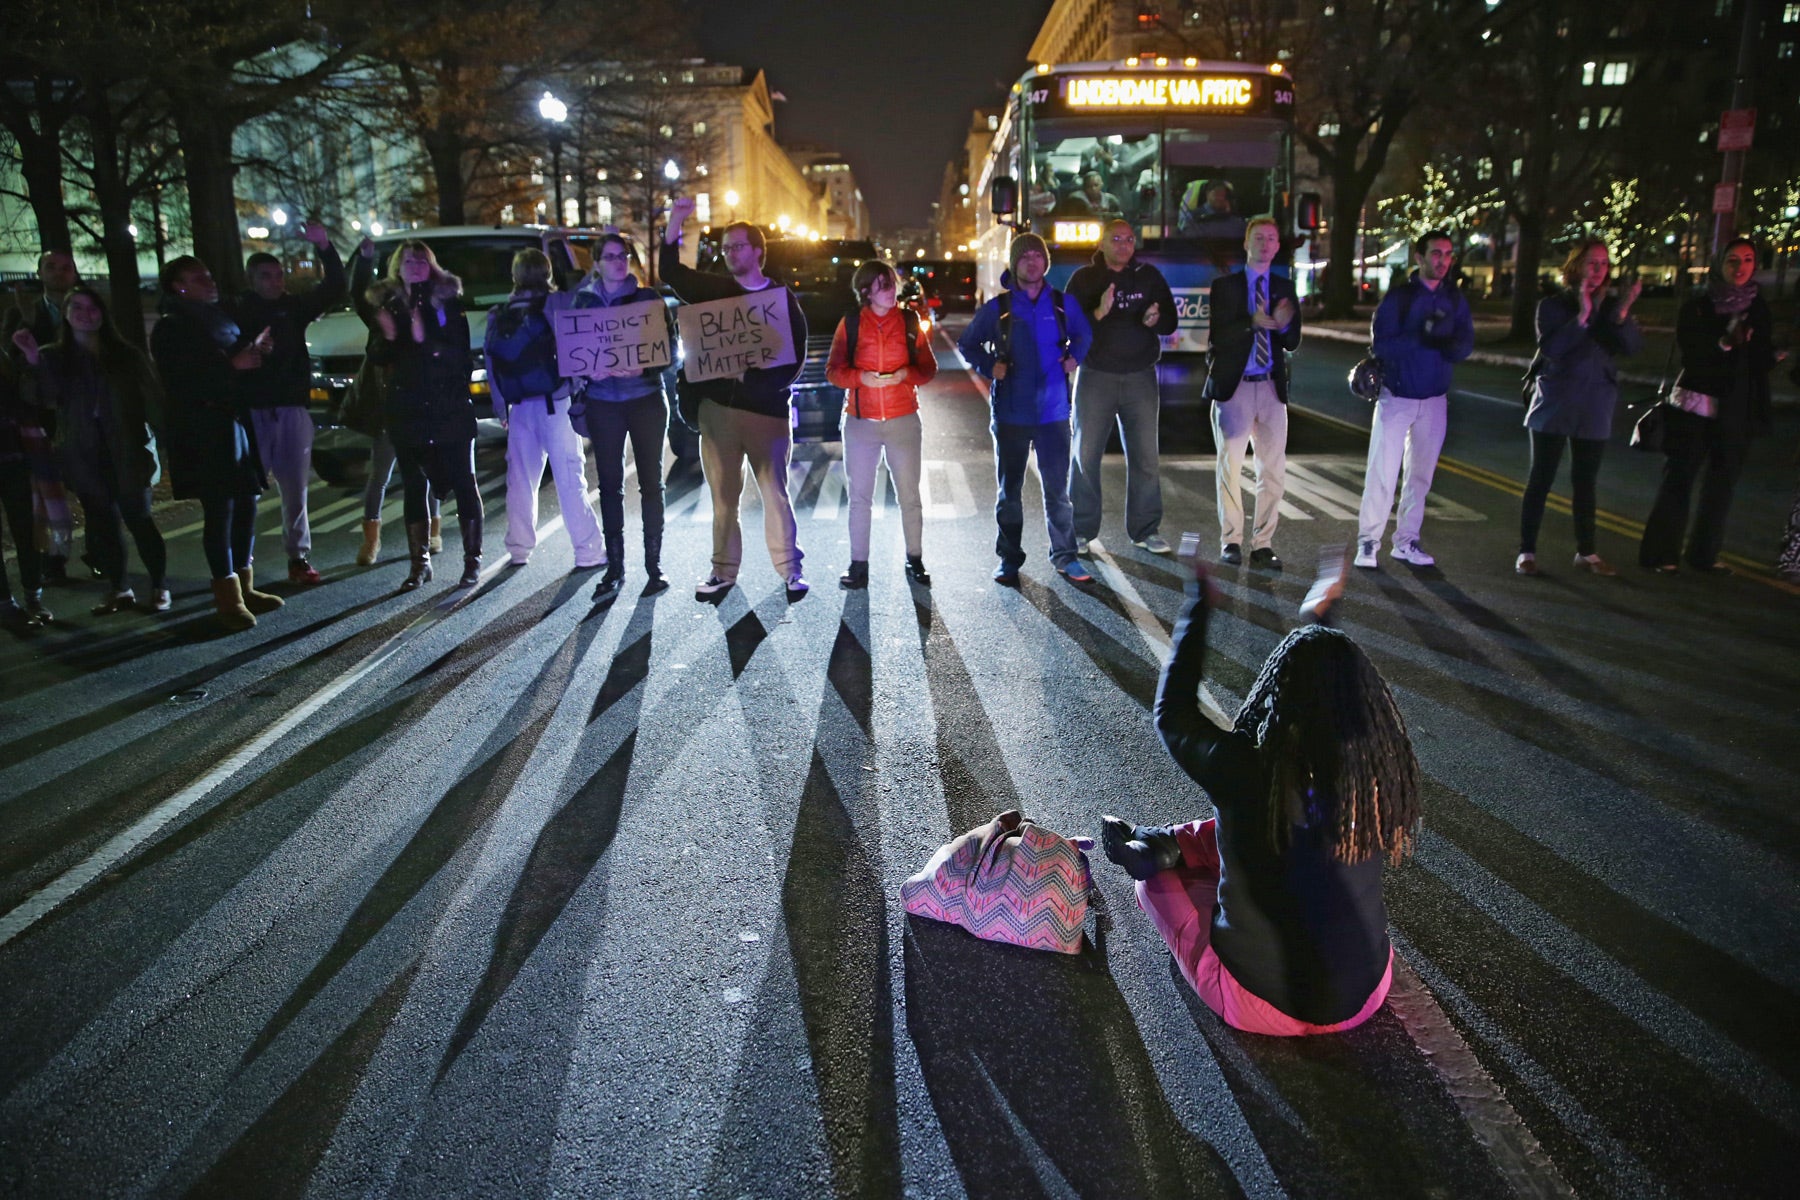 Eric Garner Decision Sparks Protests Across the Country